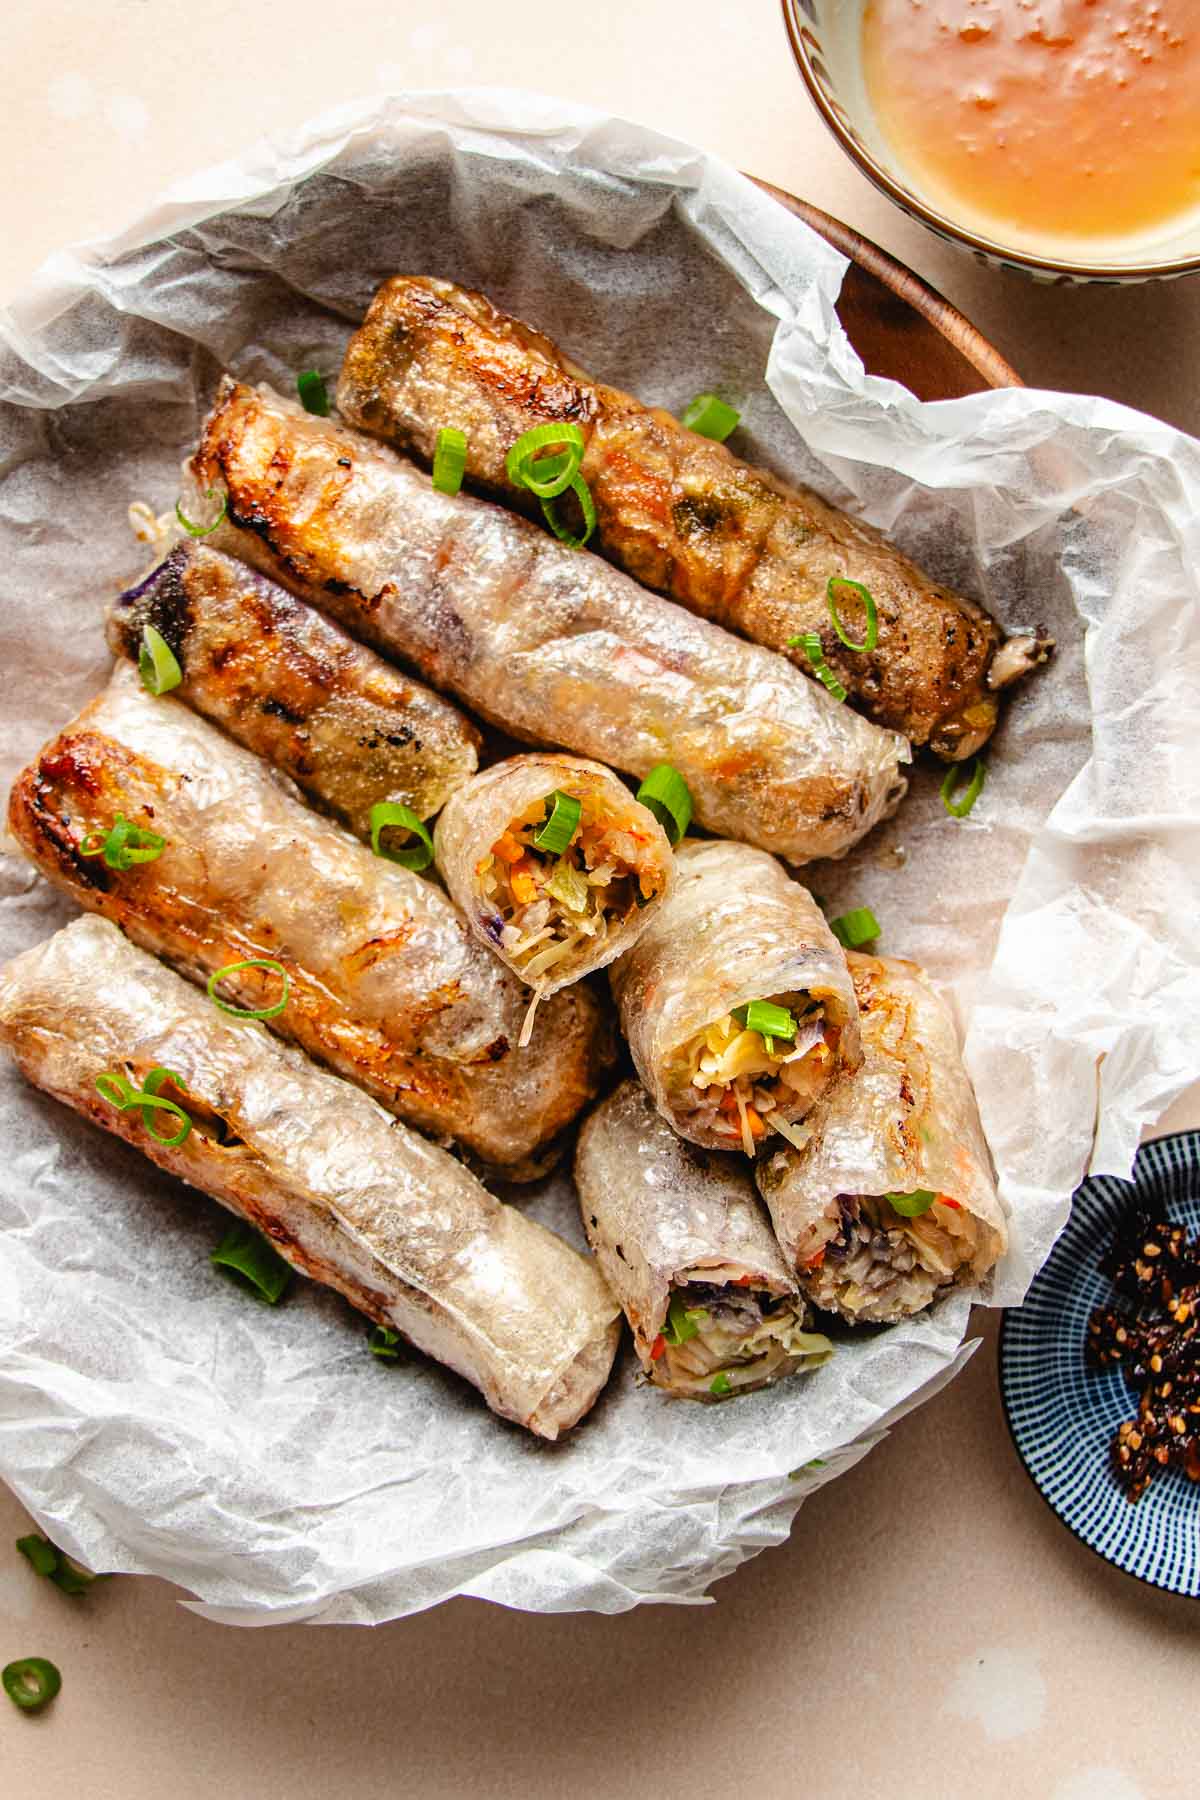 Gluten free egg rolls wrapped with rice paper sheets and fried to crispy.